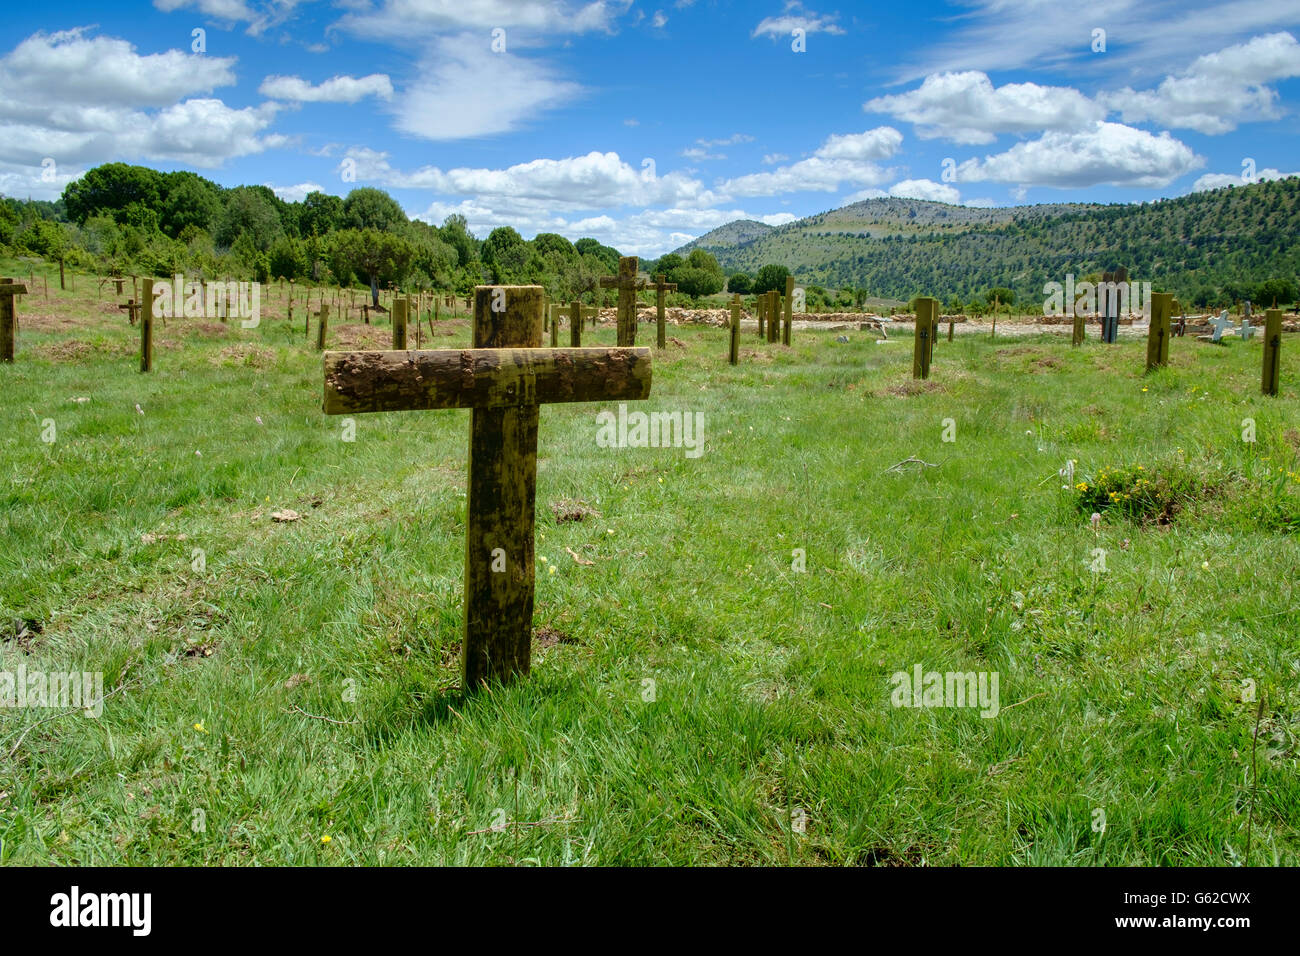 Sad Hill cemetery - depicted in the film 'The Good, the Bad and the Ugly' - near Covarrubias in Spain Stock Photo